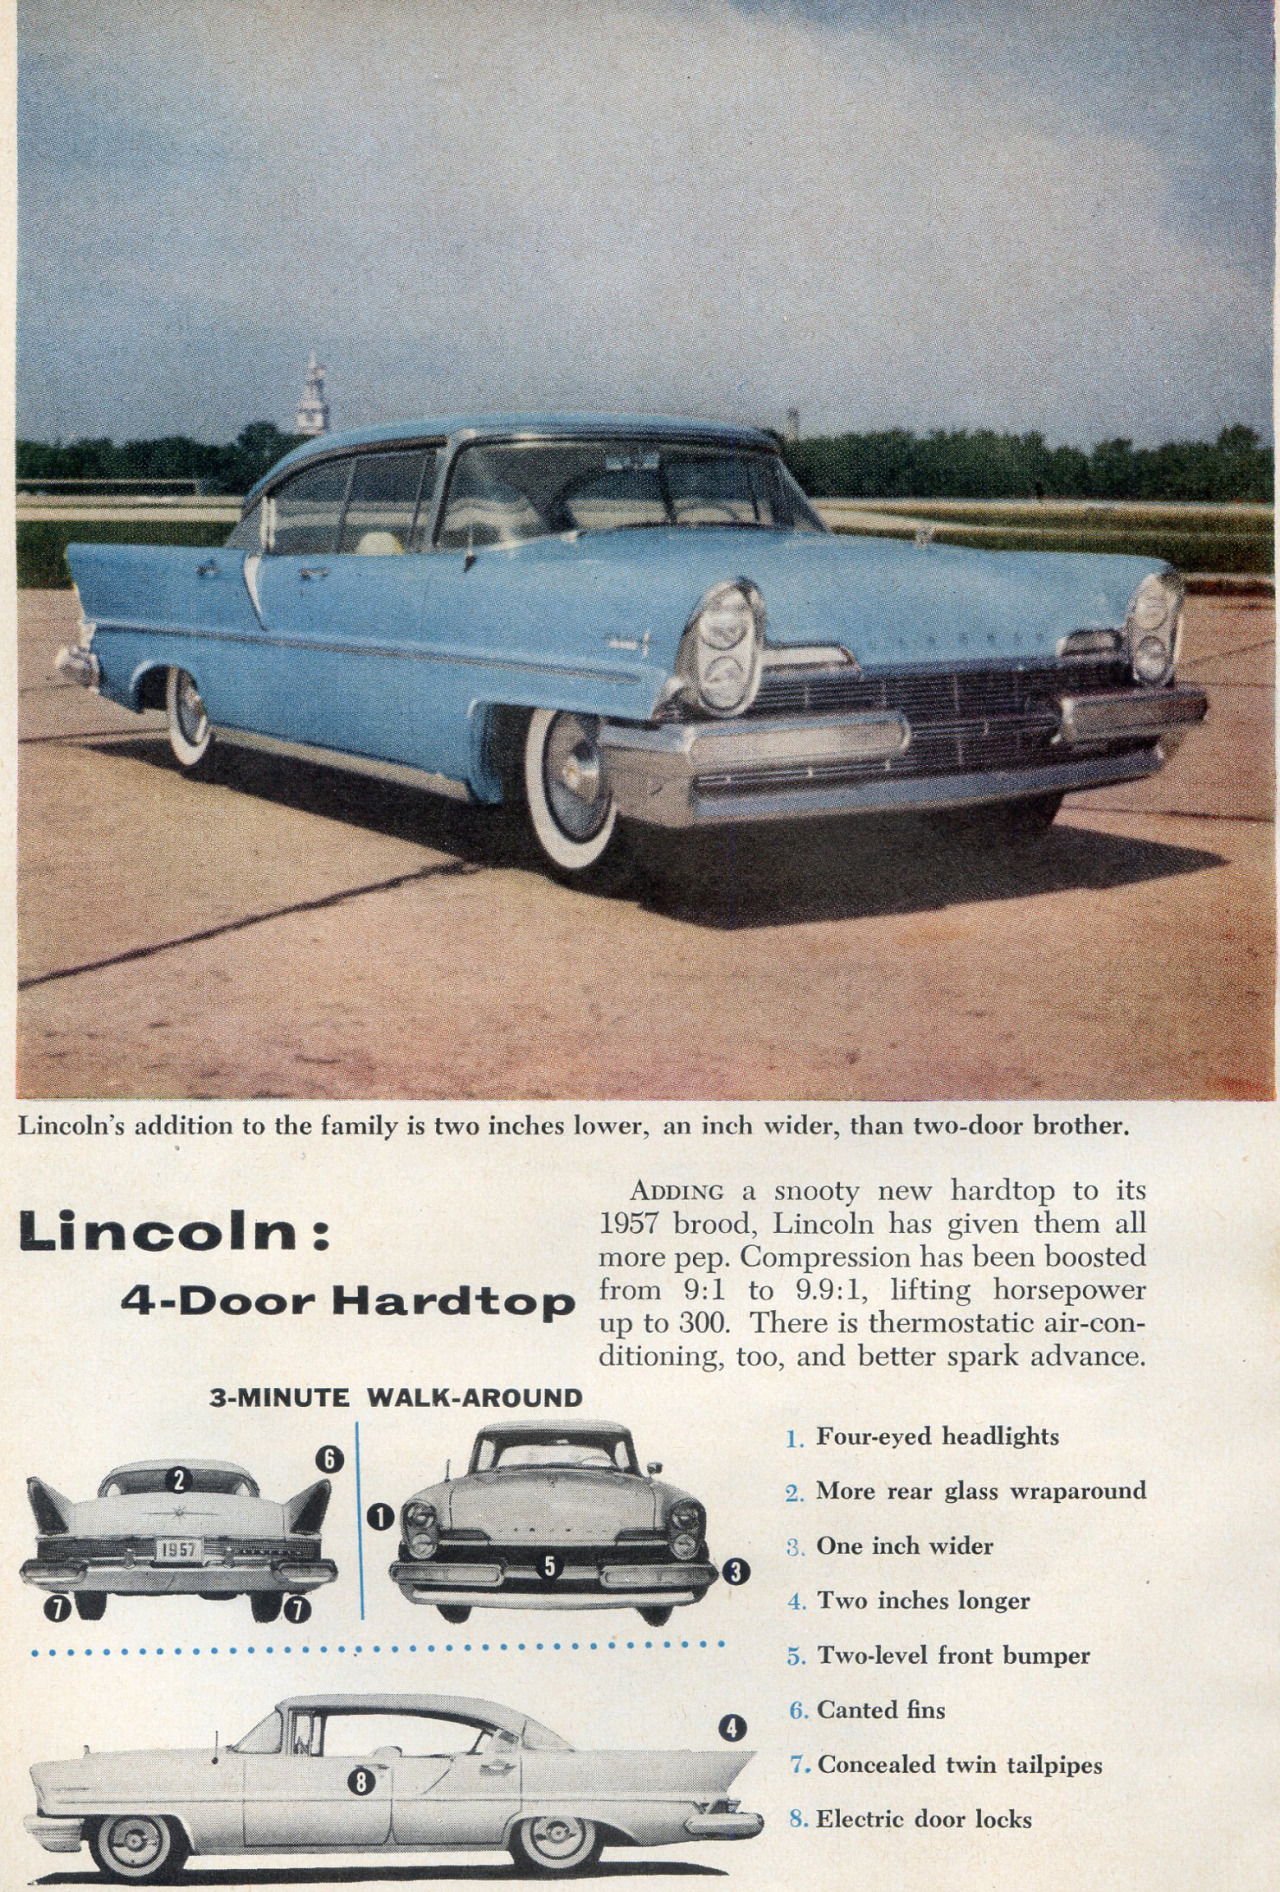 In life you may get only one shot to get a Lincoln, you need to aim high to get ahead.Too soon?Popular Science   November 1956 #automotive#lincoln#1956#1950s cars#50s cars#1950s cars#funny#humor#humour